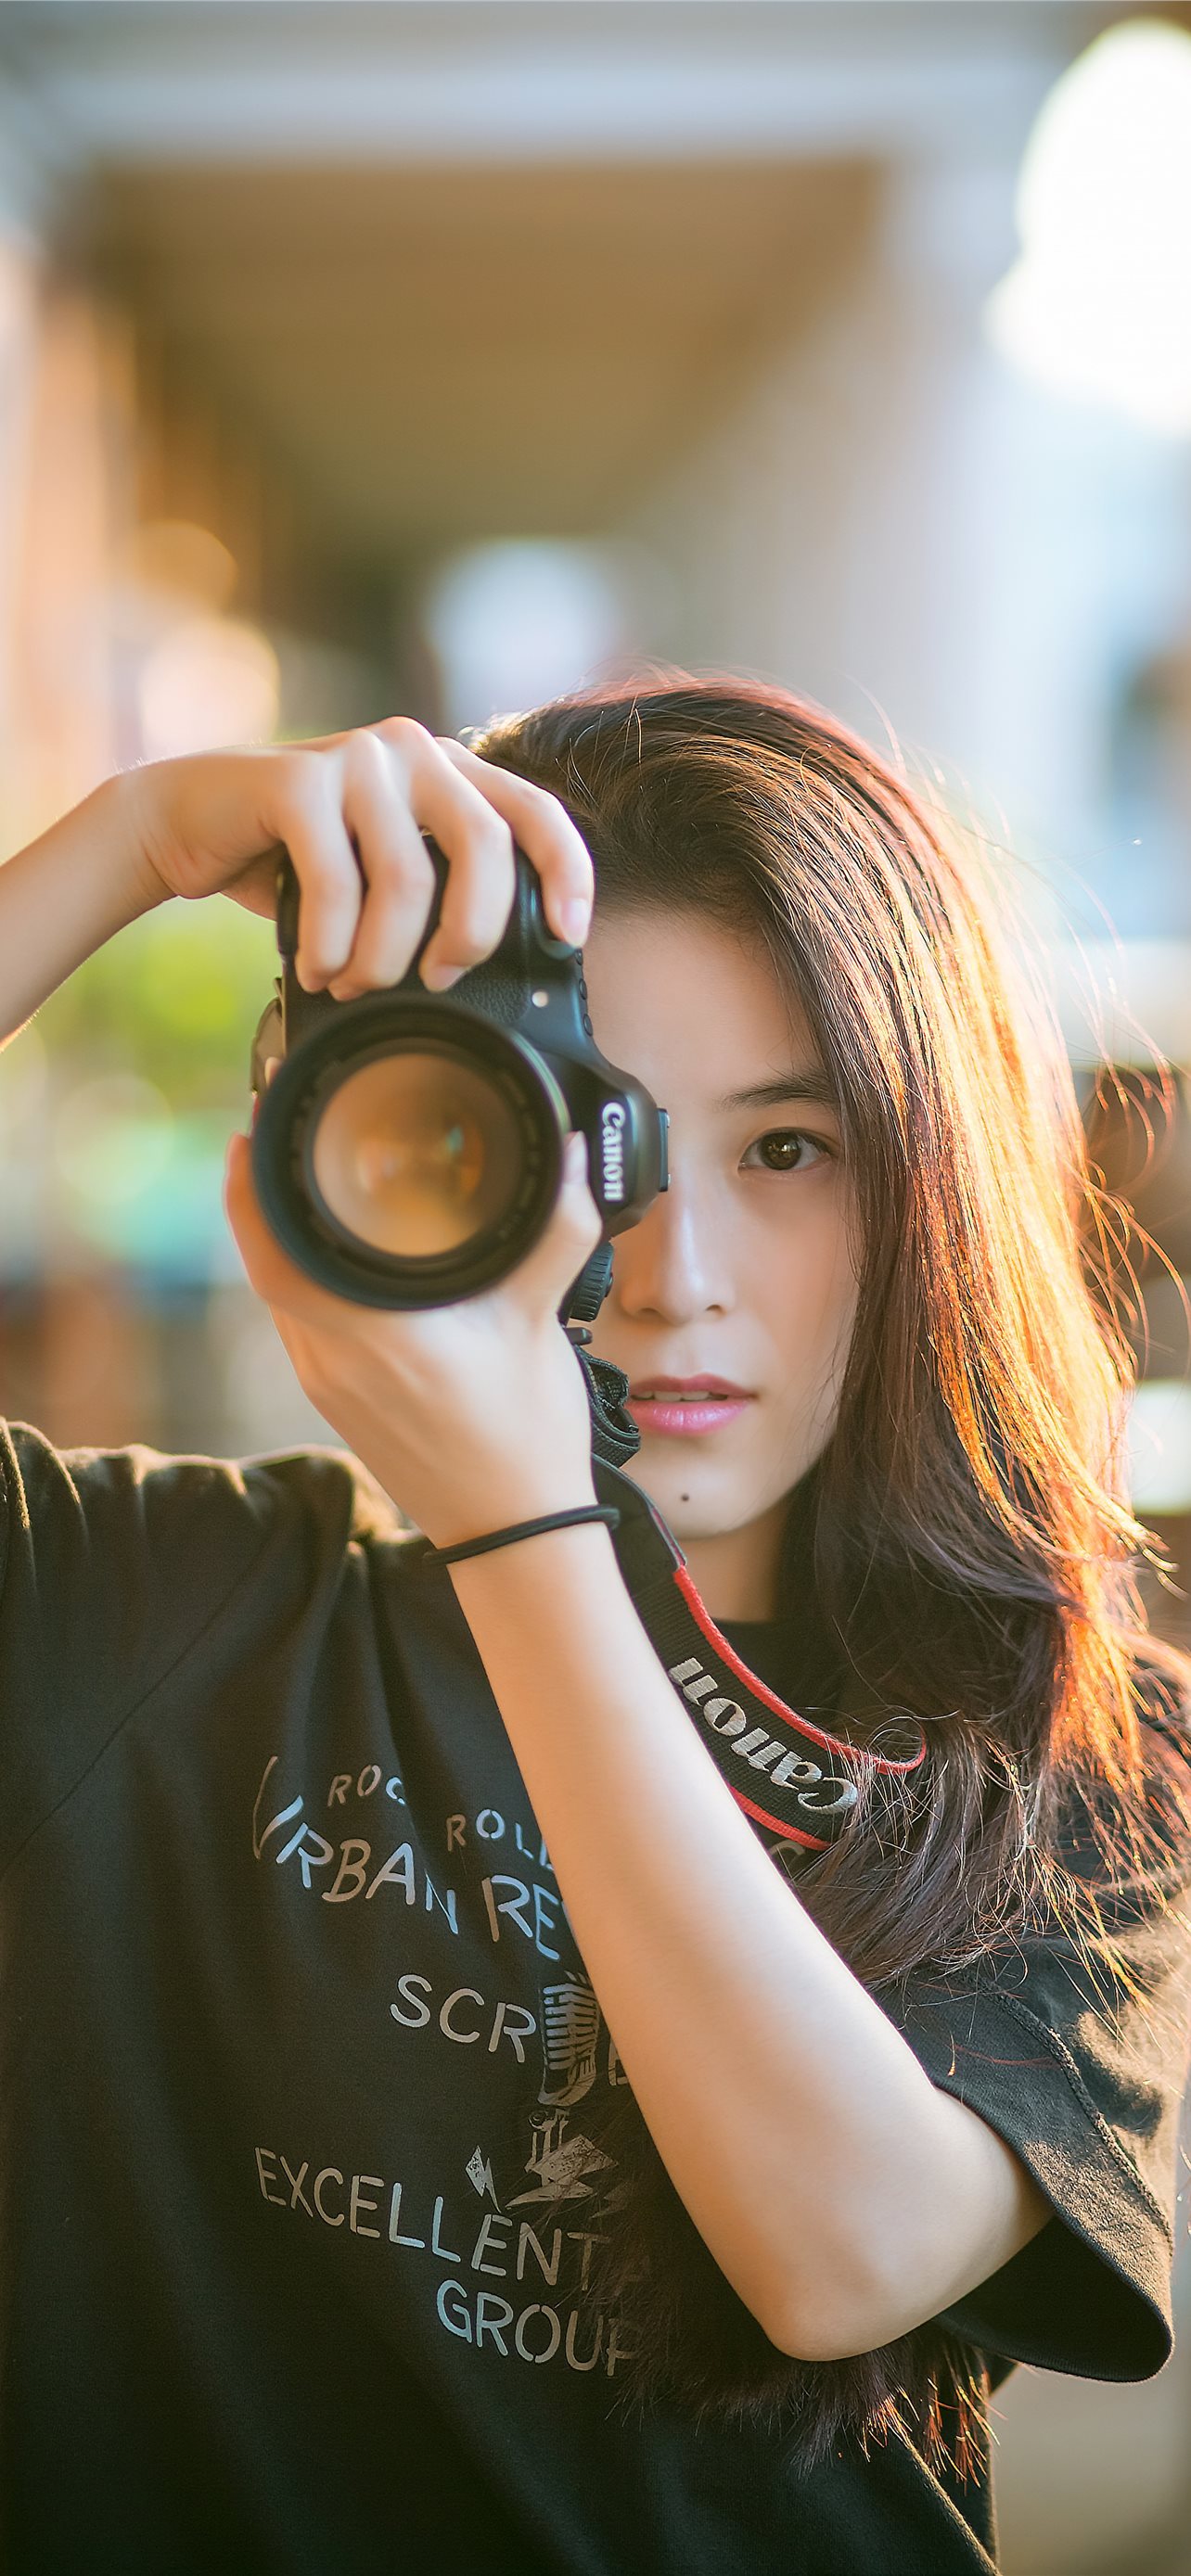 Black Canon Dslr Camera Girl Photography teahub io iPhone Wallpapers Free  Download